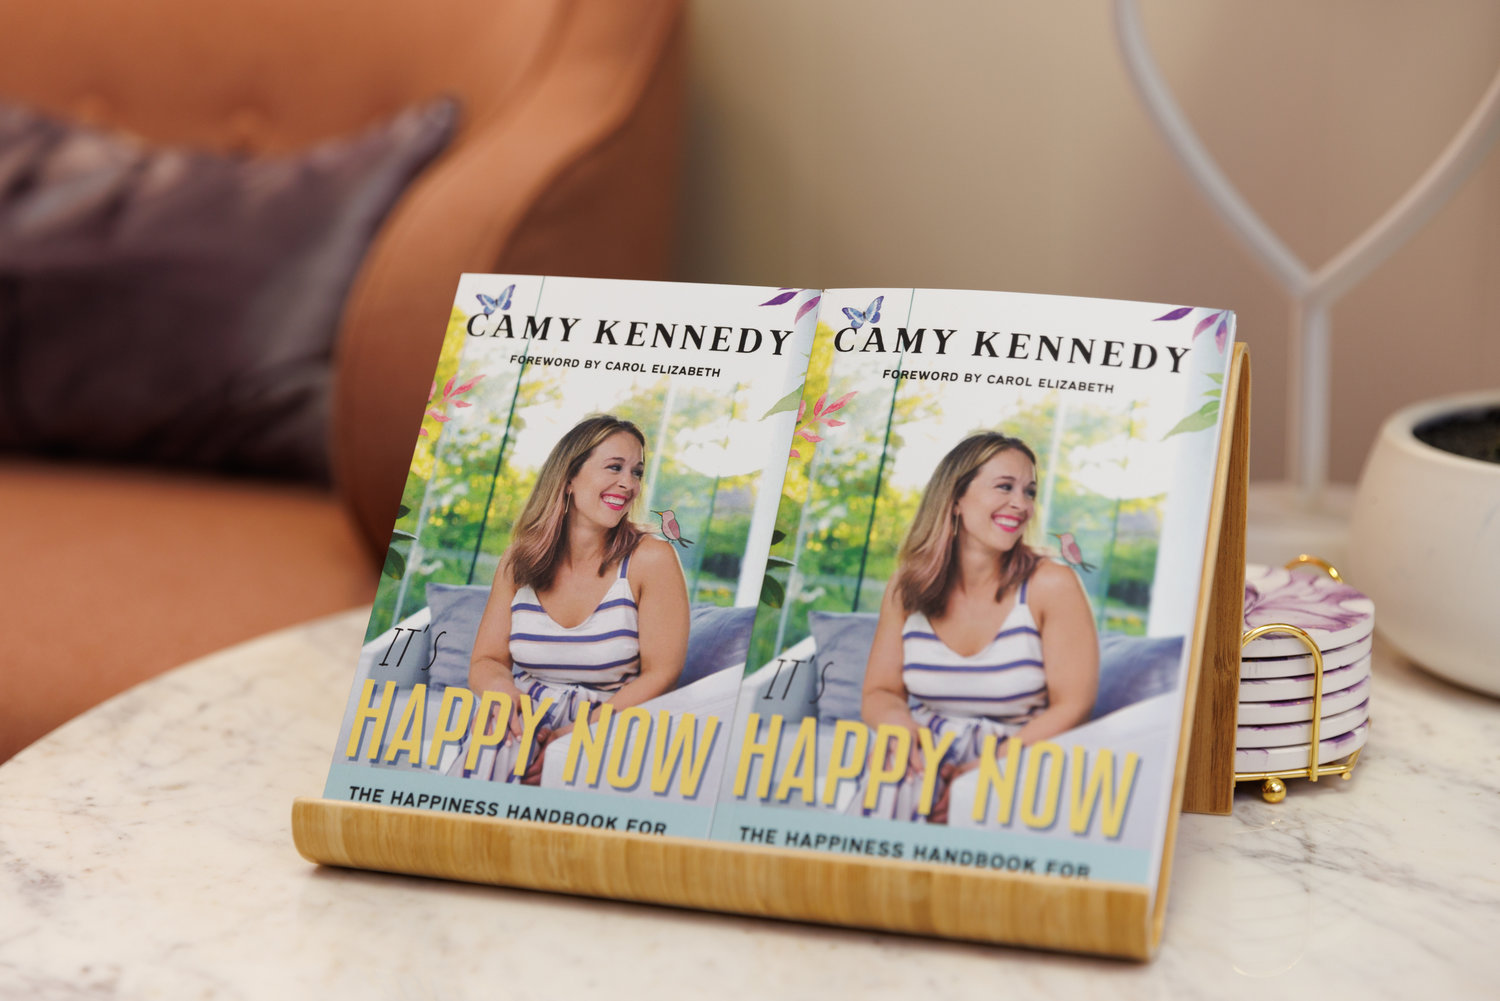 Kennedy describes her book, “It’s Happy Now,” as a handbook for high achievers.